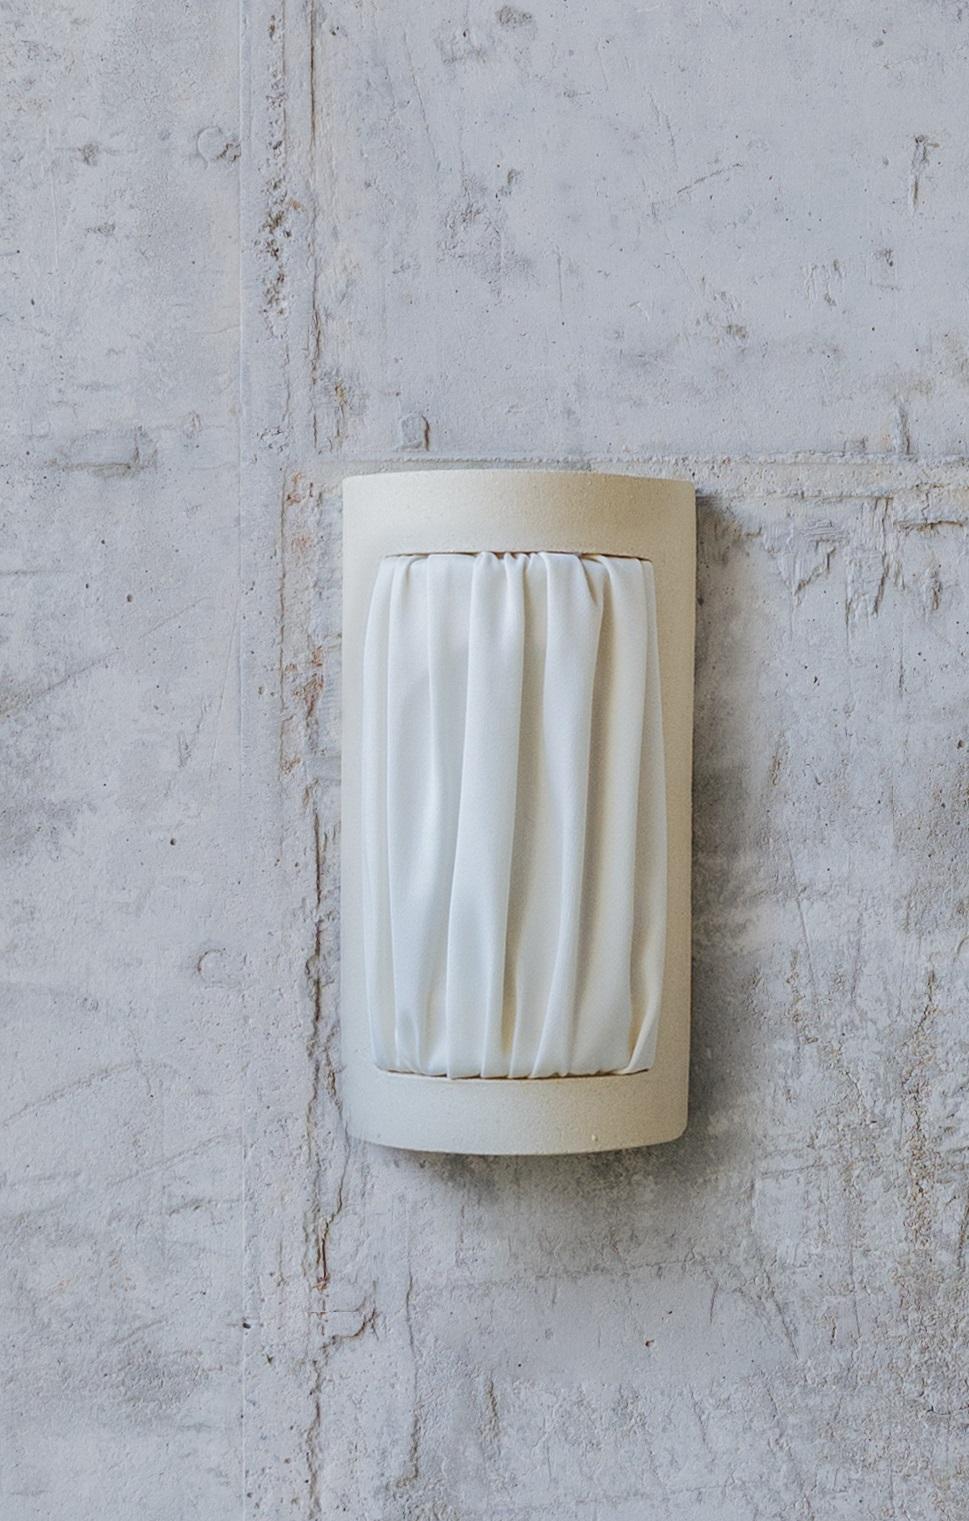 Set of 2 Almond Small Istos Wall Lights by Lisa Allegra
Dimensions: D 7.5 x W 11.5 x H 21 cm (each).
Materials: Piece in ceramic and Dedar fireproofed fabric color Ivory.

Also available in different colored fabric: ivory, nude, salvia, senape or